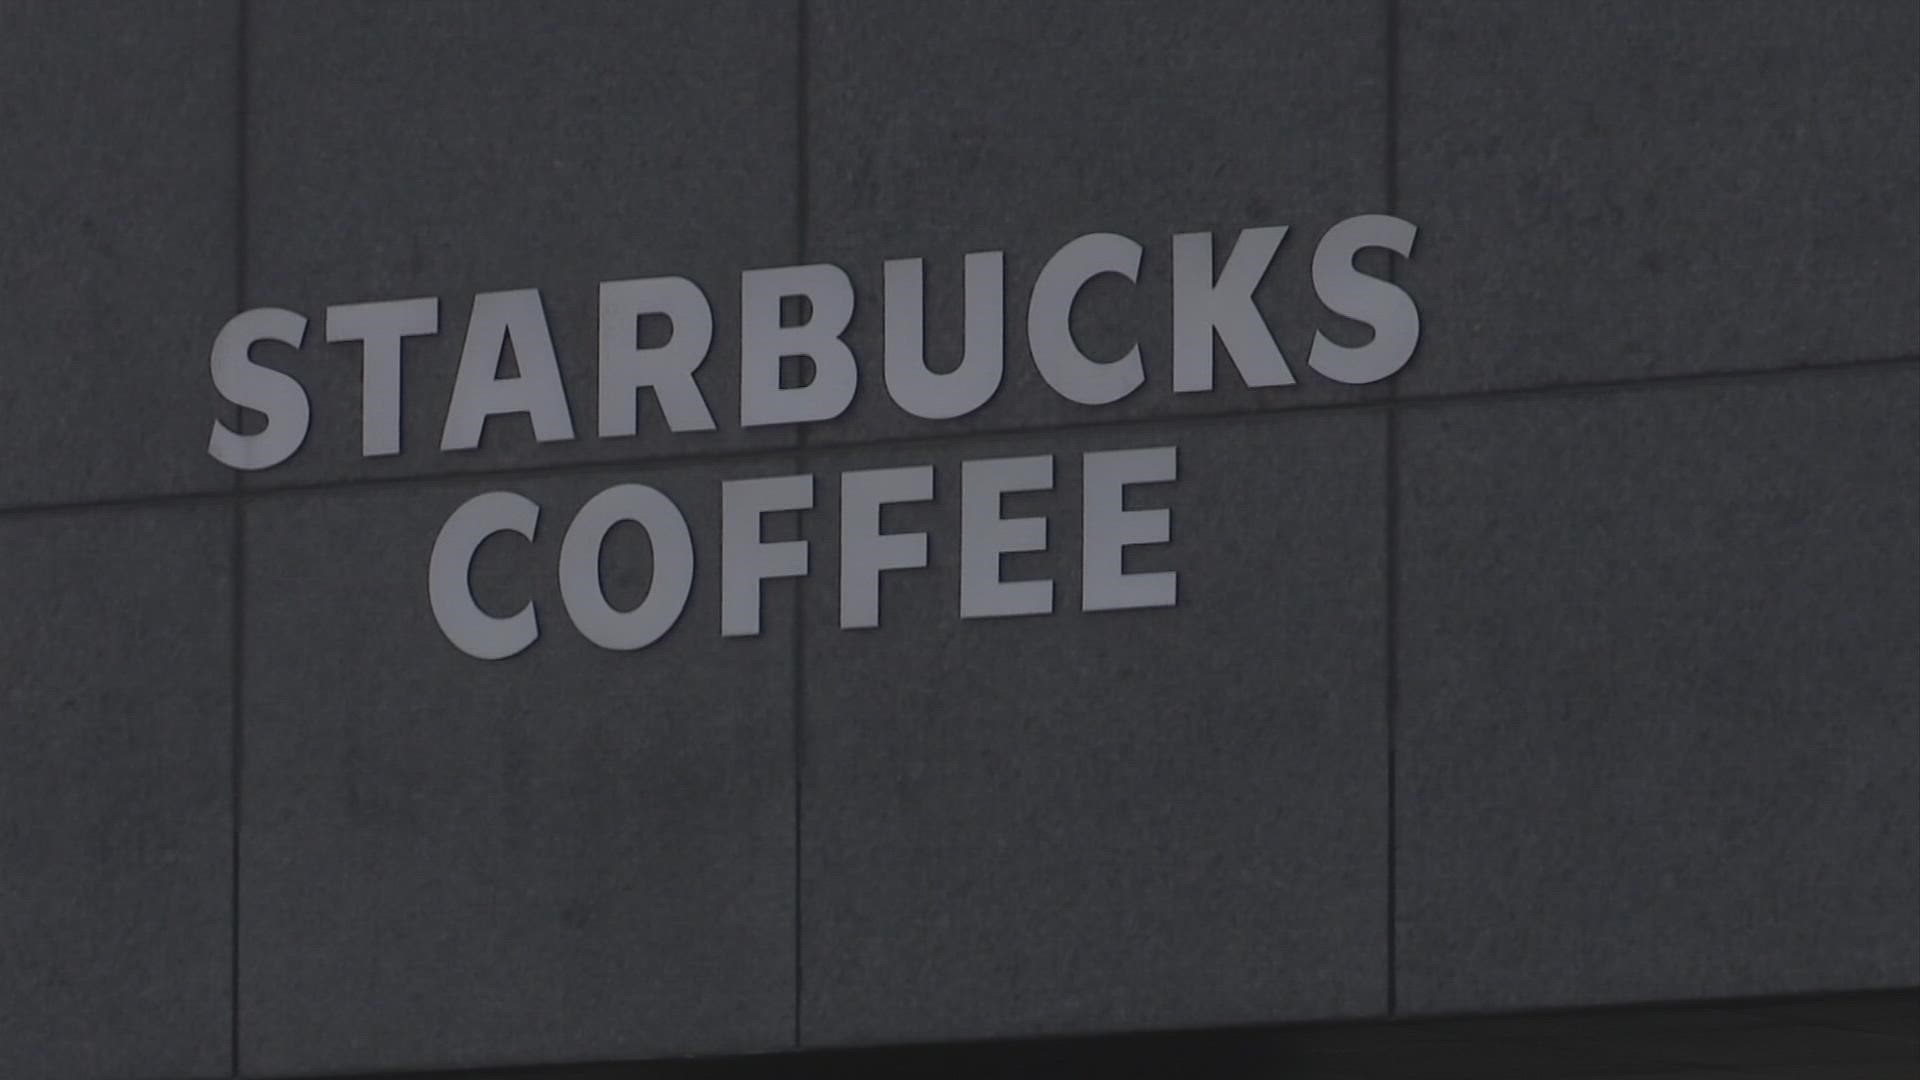 Employees at the Starbucks store located at 88 East Broad Street won their election with an 8-4 vote to become a part of the Starbucks Workers United union.